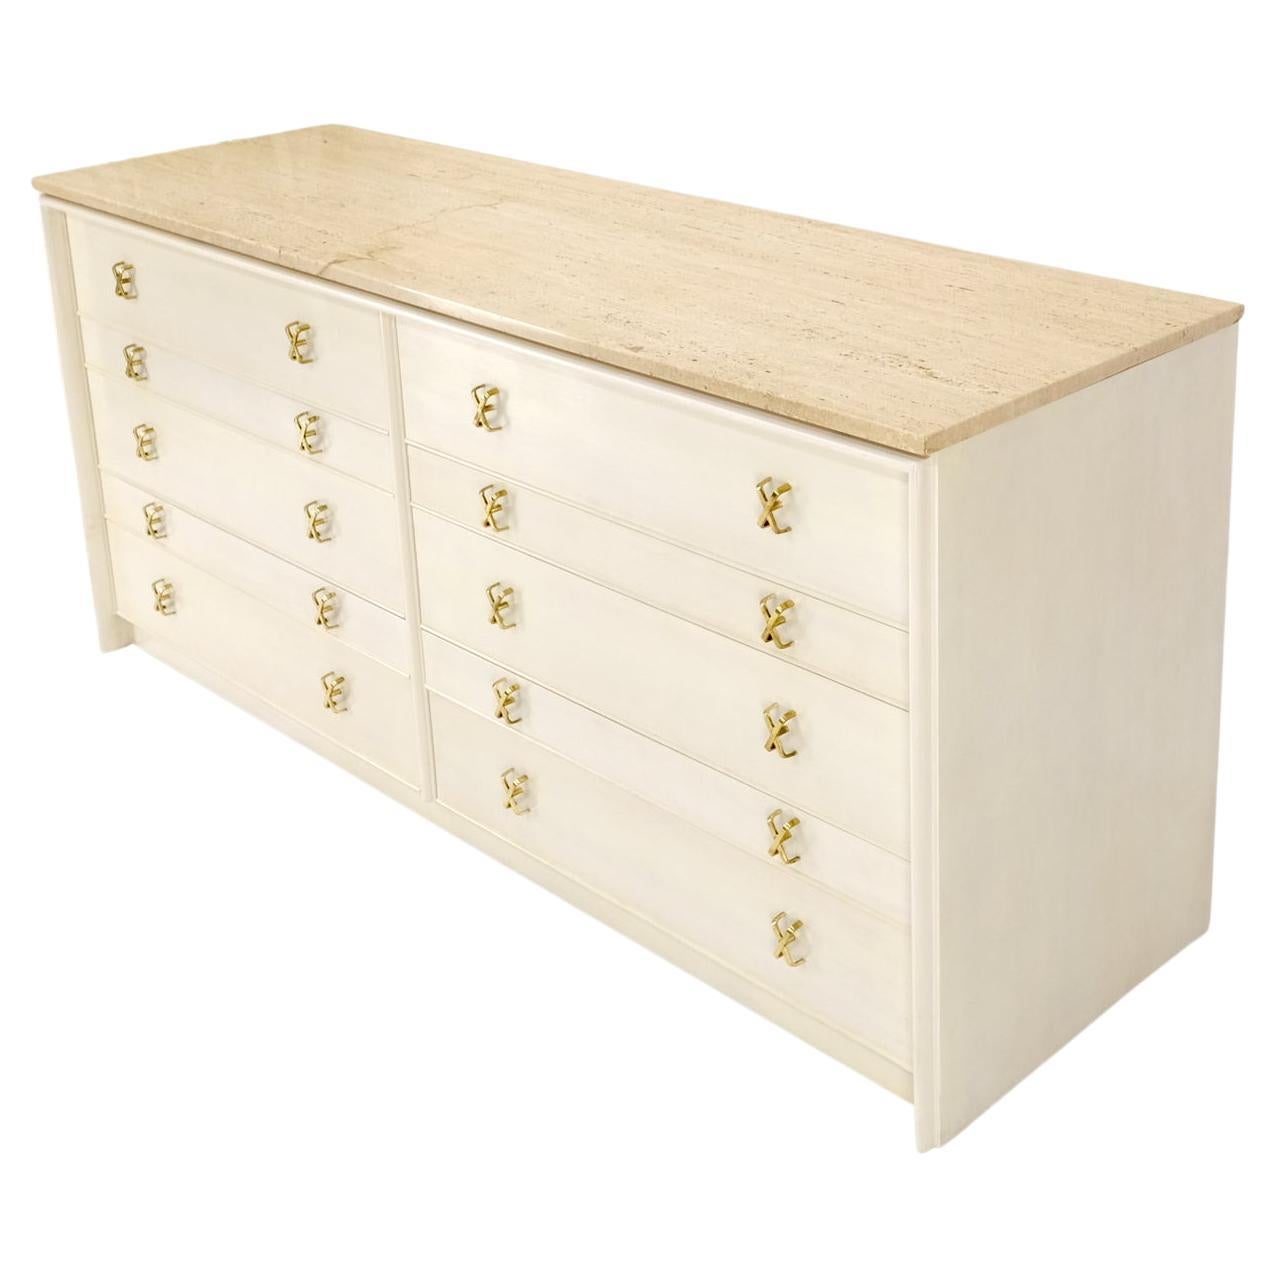 Mid-Century Modern Paul Frankl for Johnson White Wash Marble Top 10 Drawers Dresser Brass x Pulls For Sale